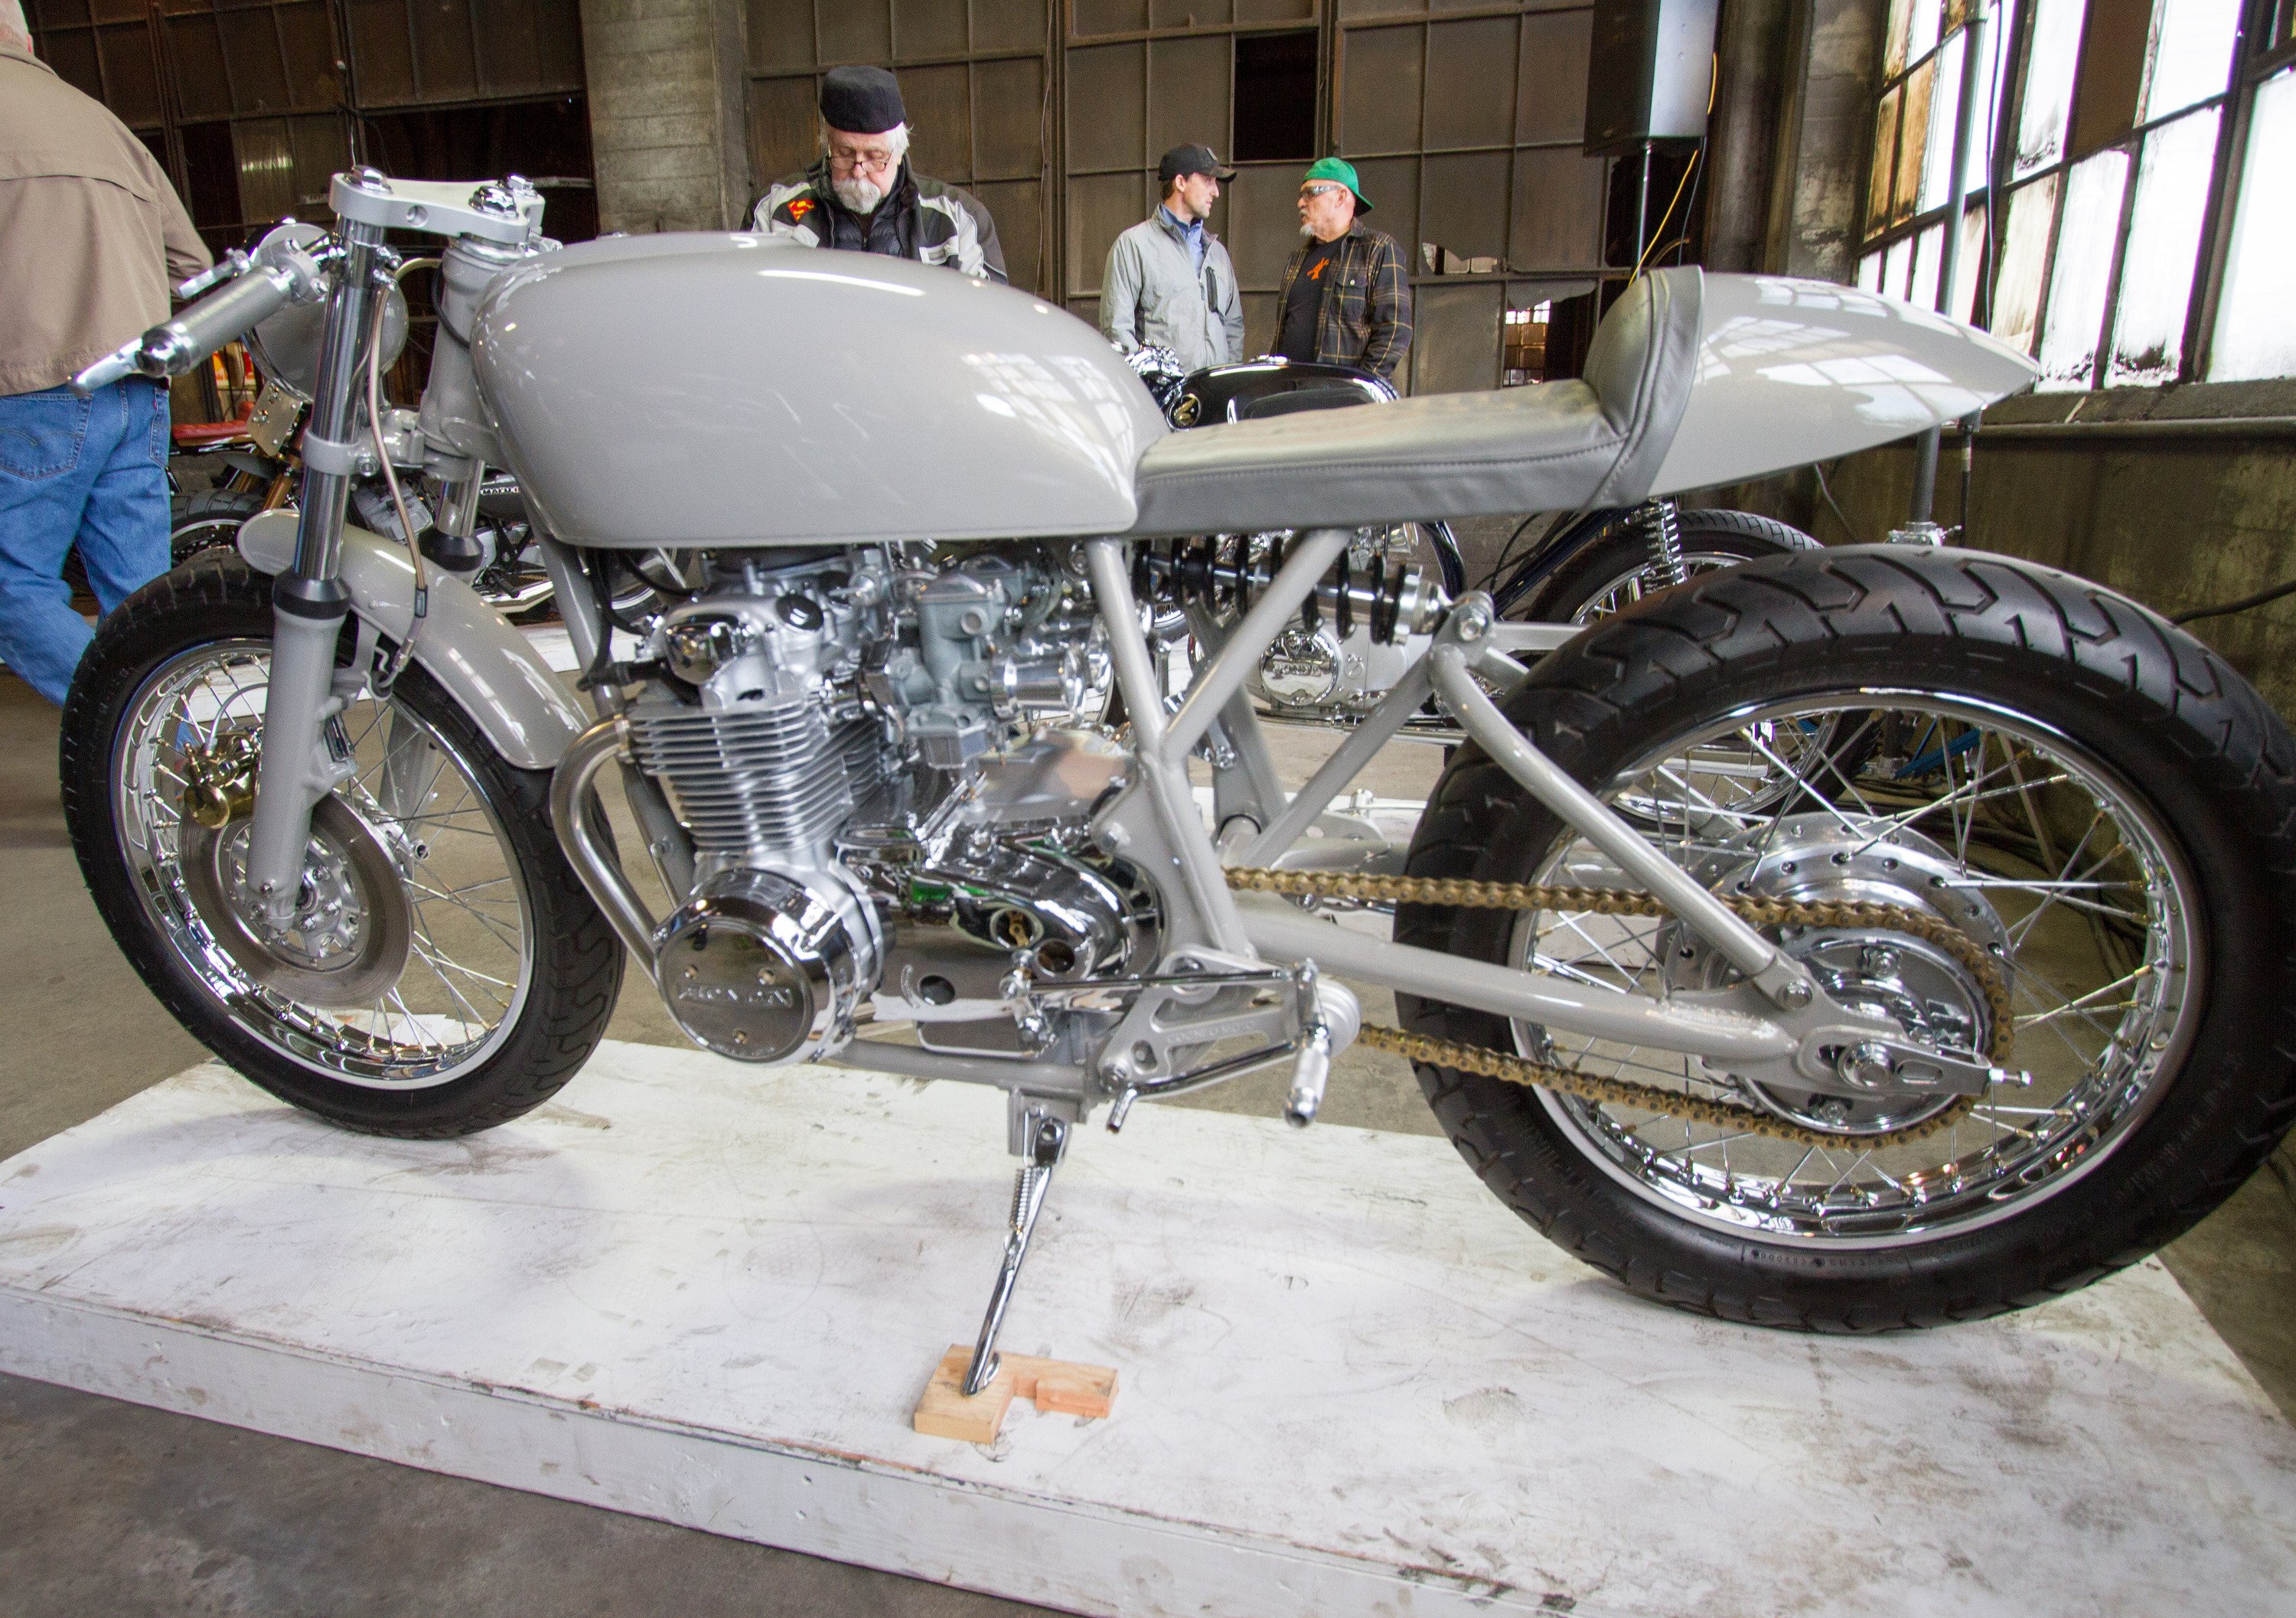  The One Motorcycle Show a Portland: speciale custom USA